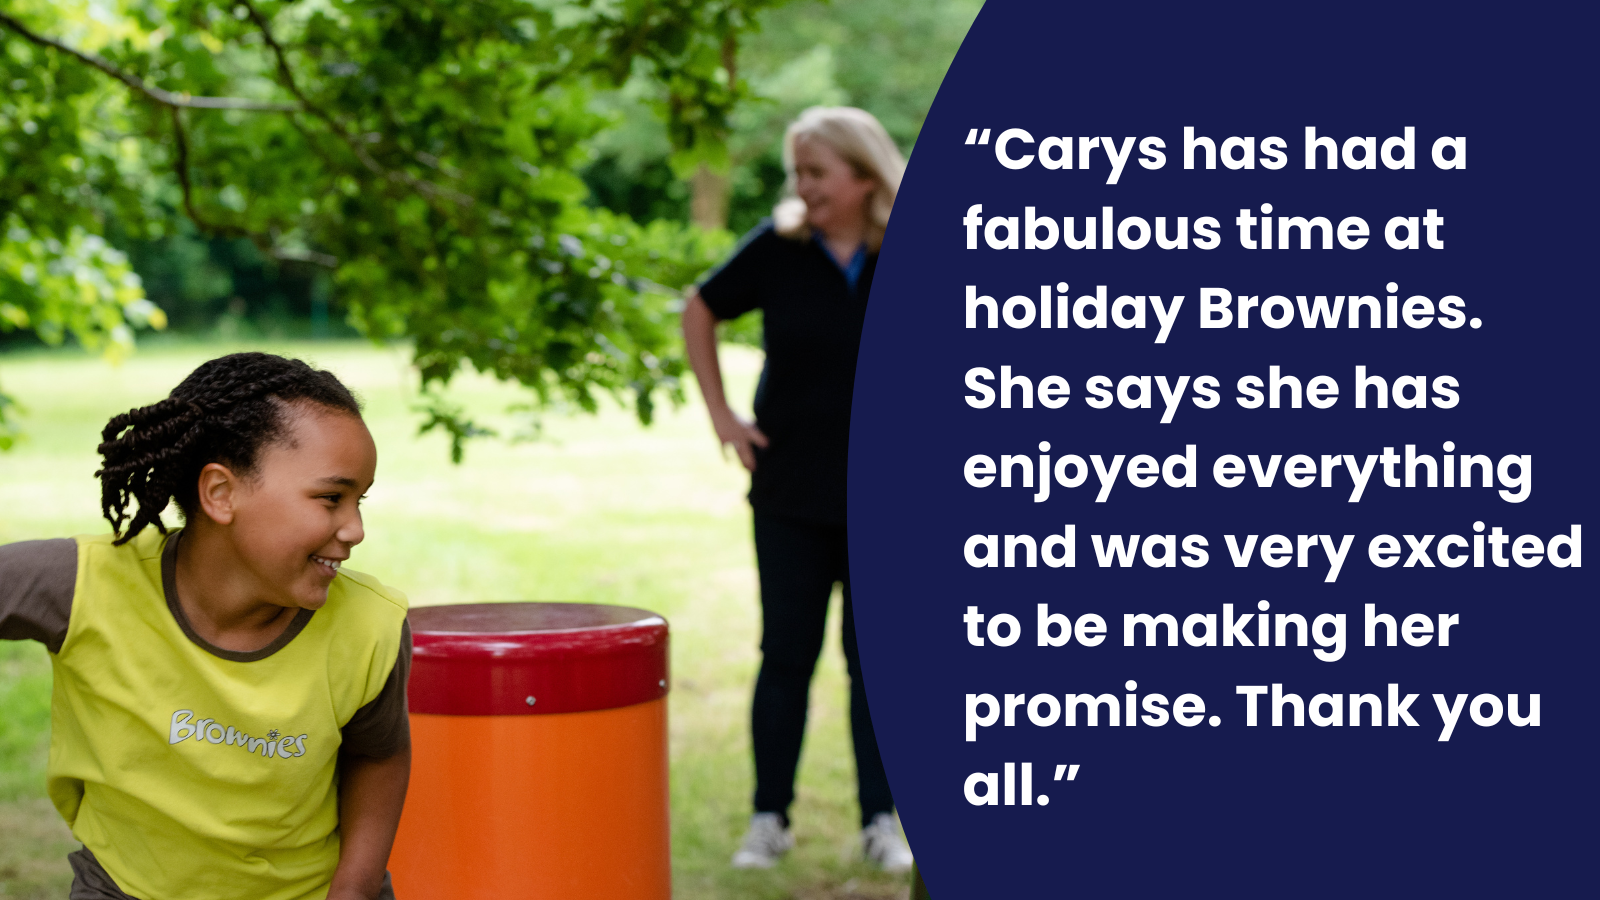 “Carys has had a fabulous time at holiday Brownies. She says she has enjoyed everything and was very excited to be making her promise. Thank you all.”